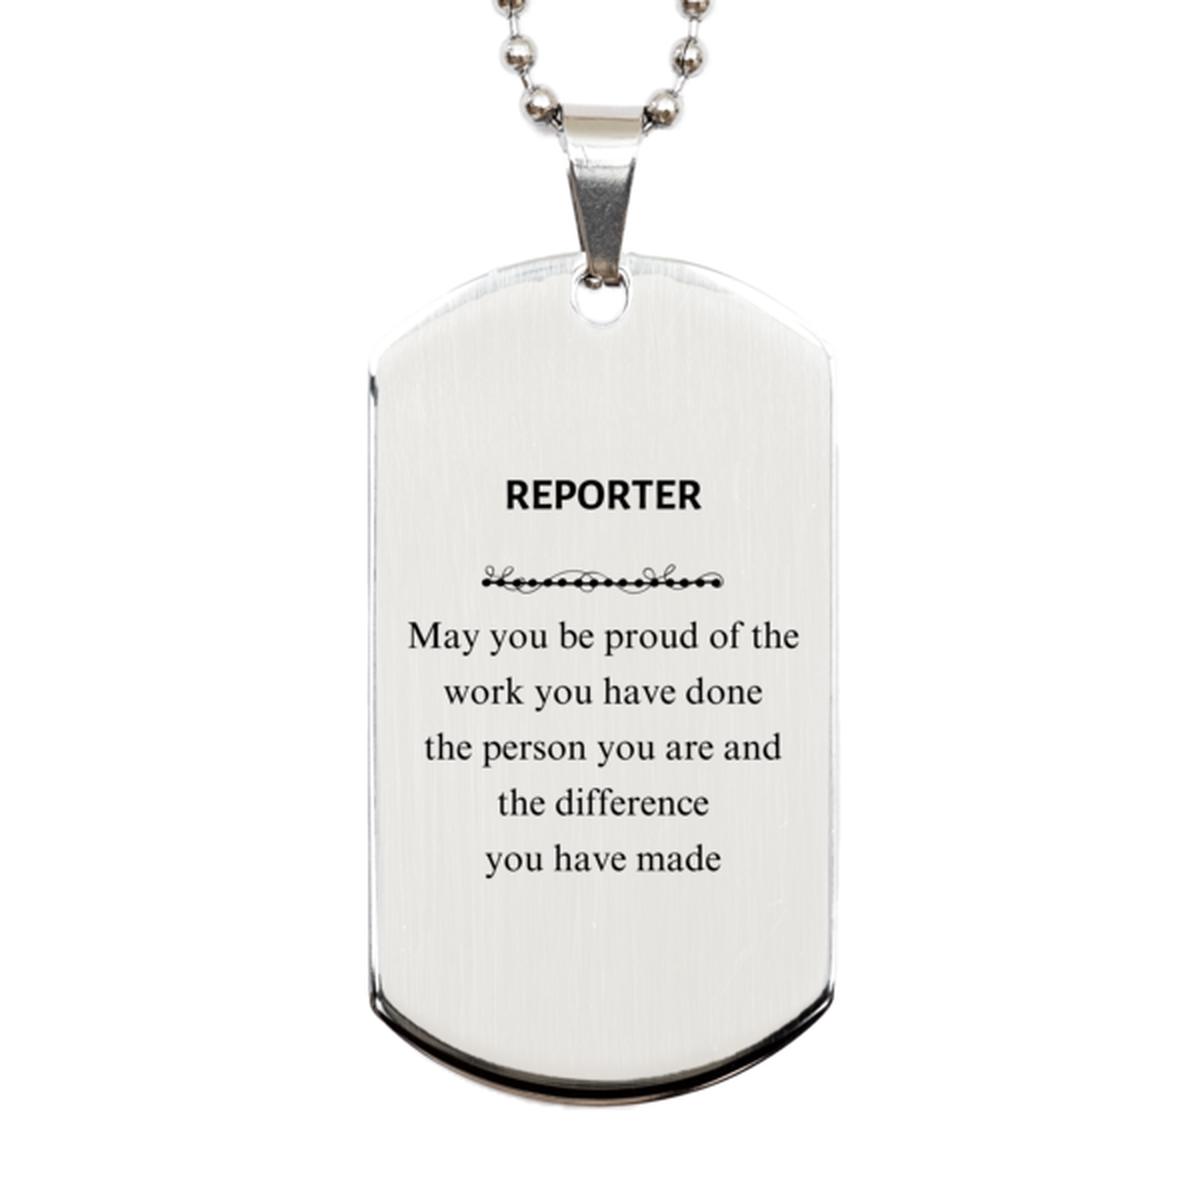 Reporter May you be proud of the work you have done, Retirement Reporter Silver Dog Tag for Colleague Appreciation Gifts Amazing for Reporter